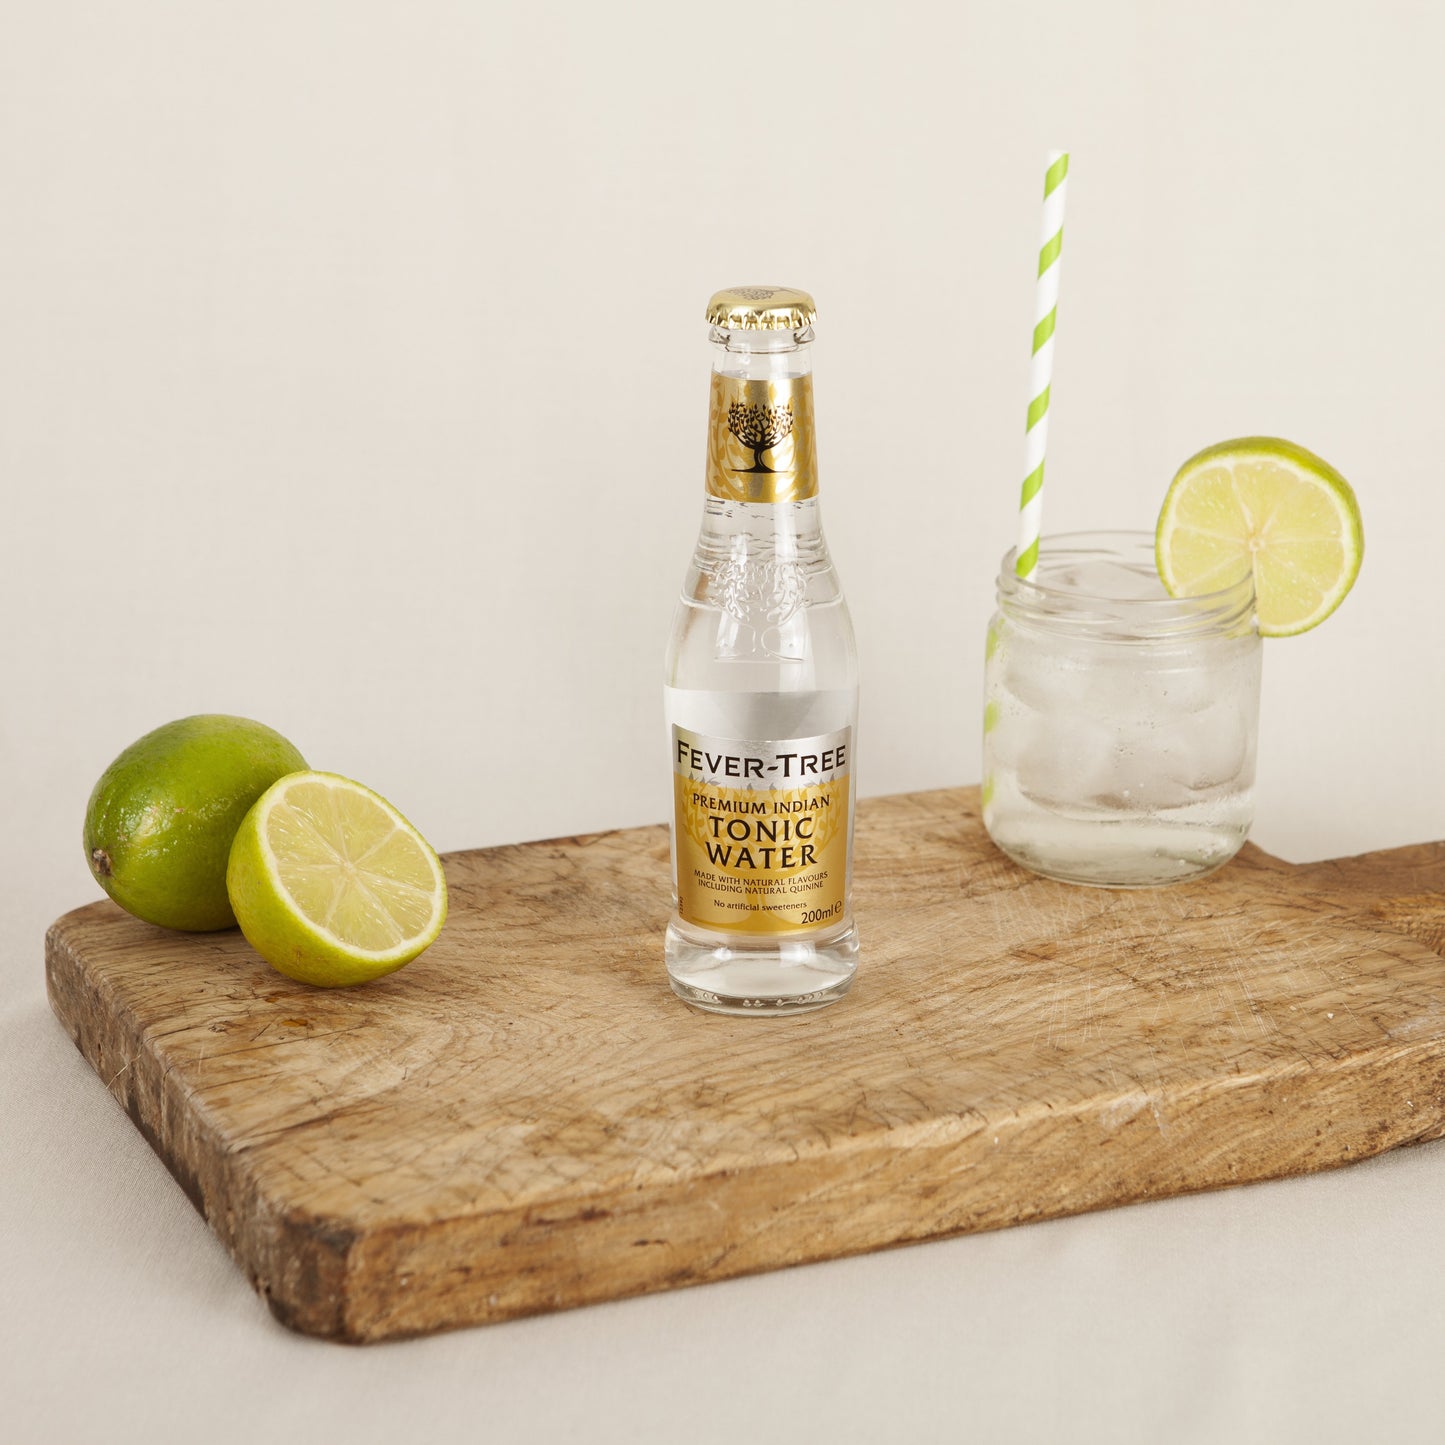 FEVER TREE INDIAN TONIC